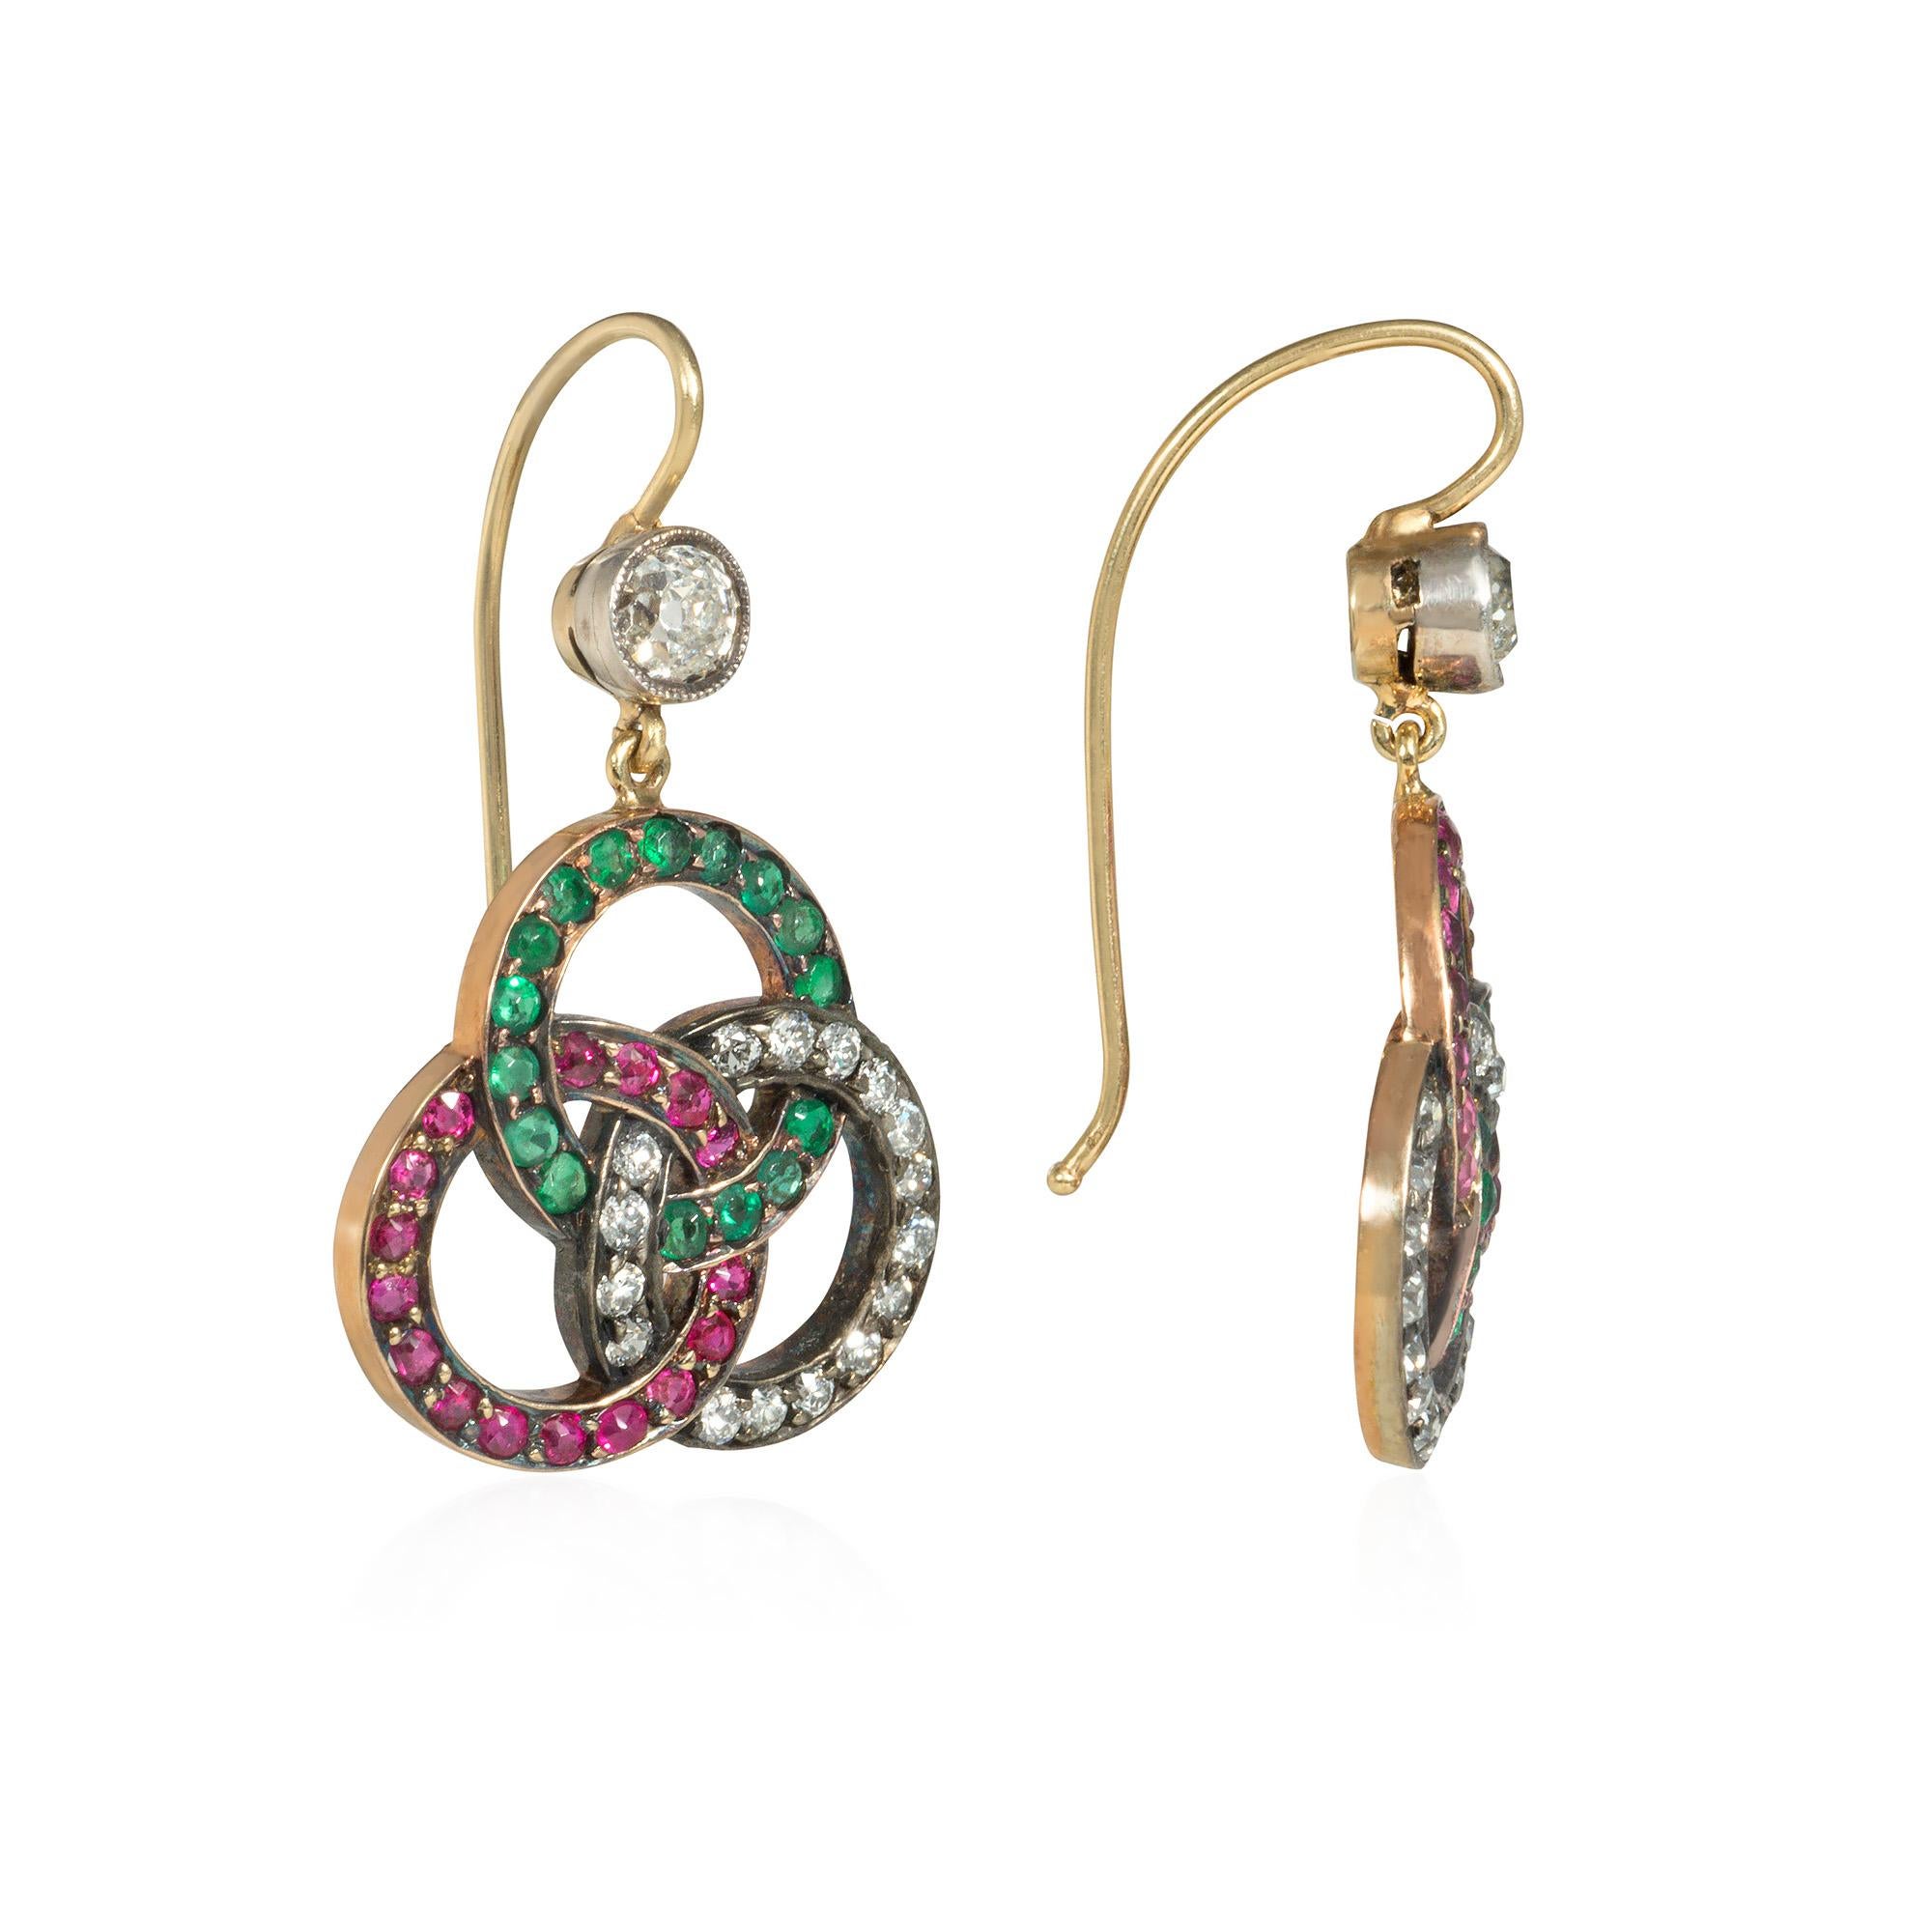 A pair of antique Victorian period multi-gemstone earrings comprising ruby, emerald, and diamond pendants of open trefoil design, suspended from diamond surmounts, in 14k gold.

* Please do not hesitate to contact Kentshire for photos of specific